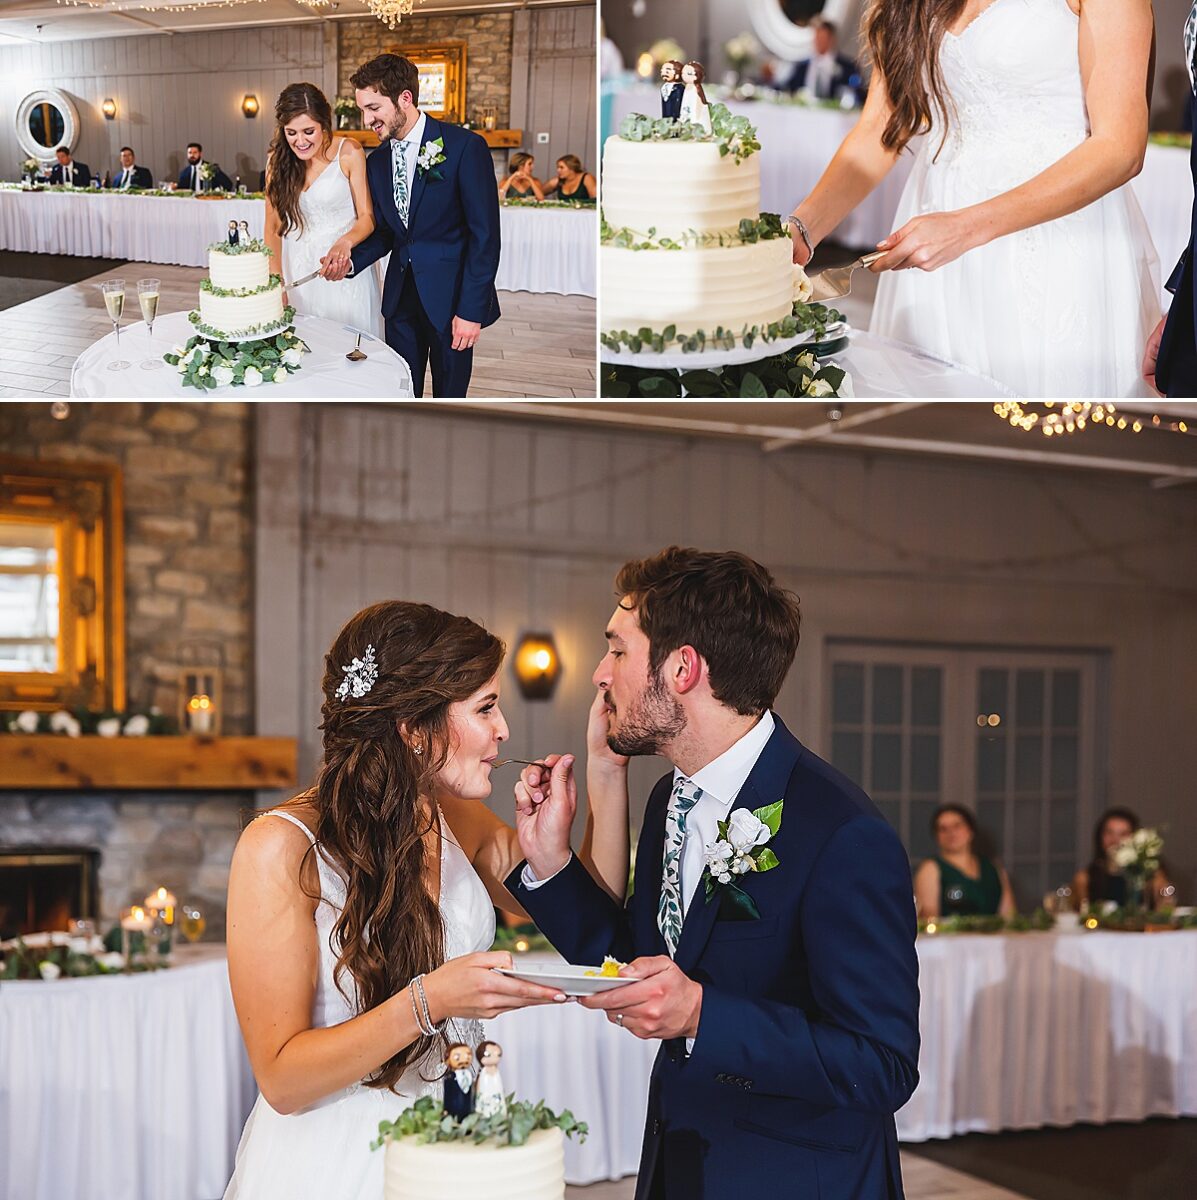 The Willows Event Center Wedding | Willows on Westfield Wedding | The Willows Event Center Lodge Wedding | Indianapolis Wedding Photographer | casey and her camera